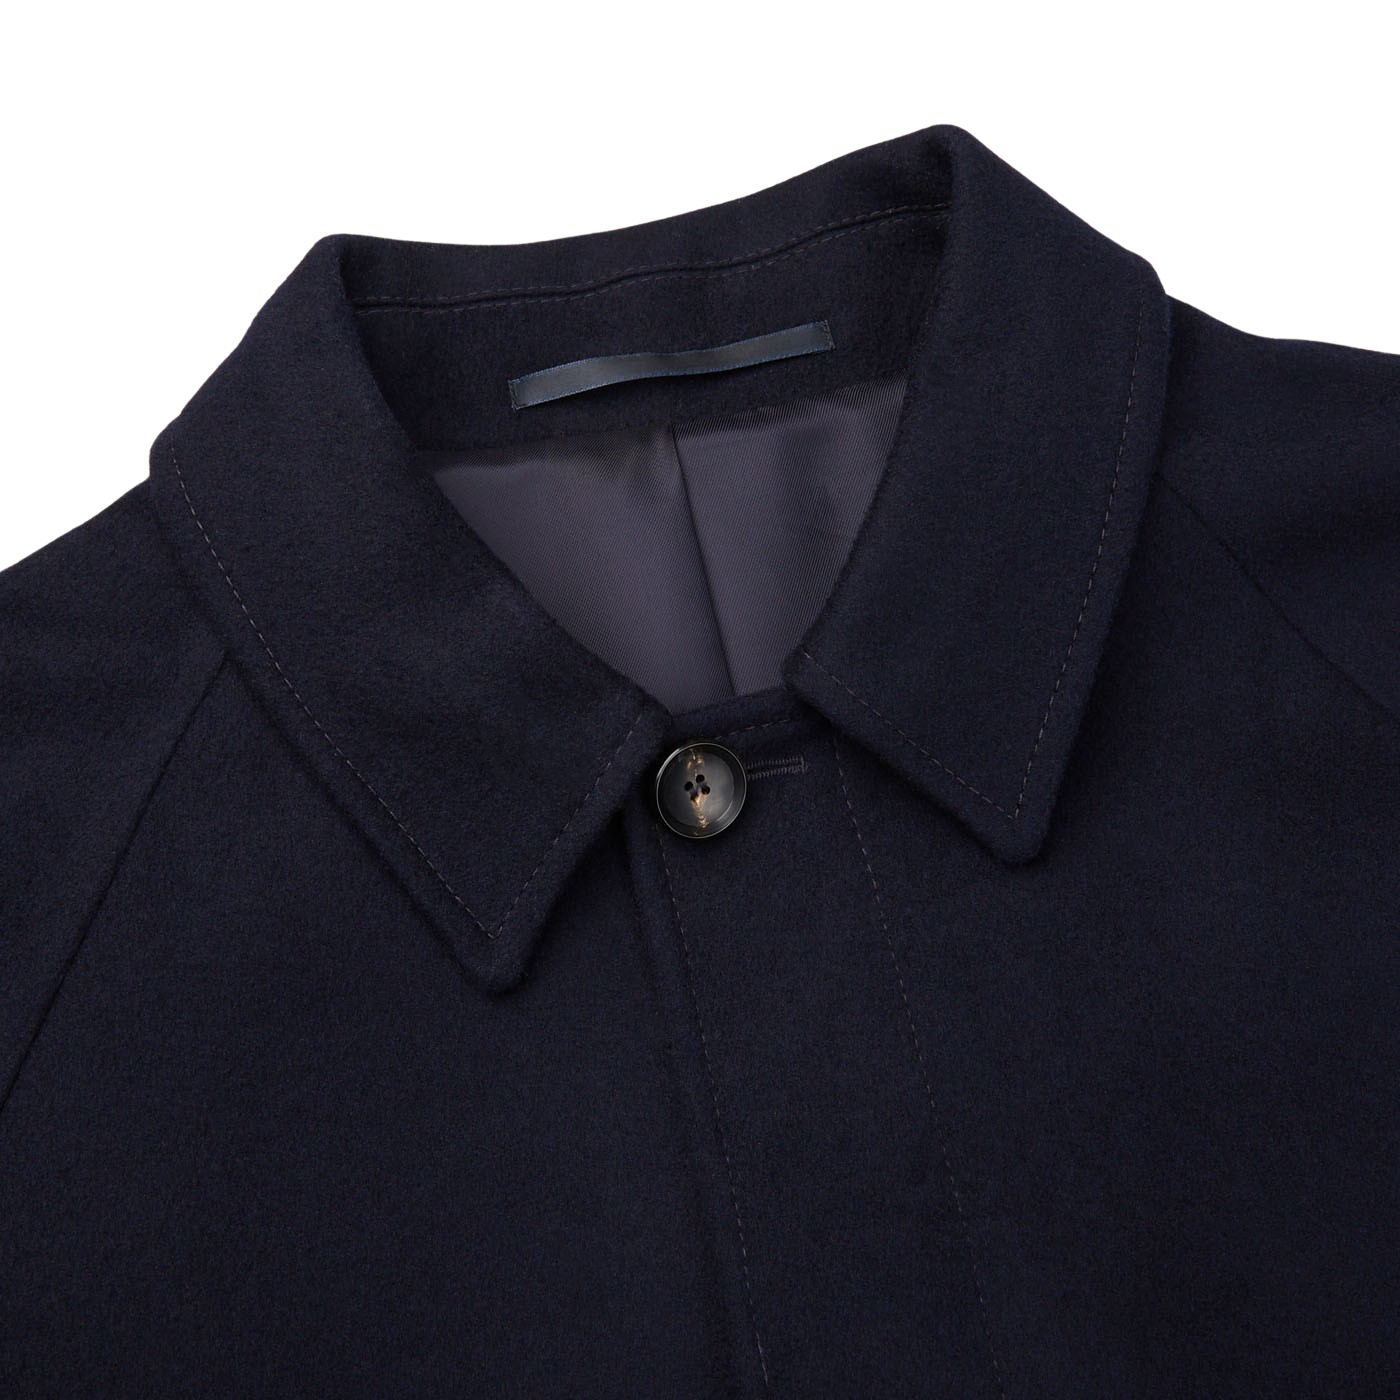 A close up of a Studio 73 navy wool cashmere raglan coat on a white background.